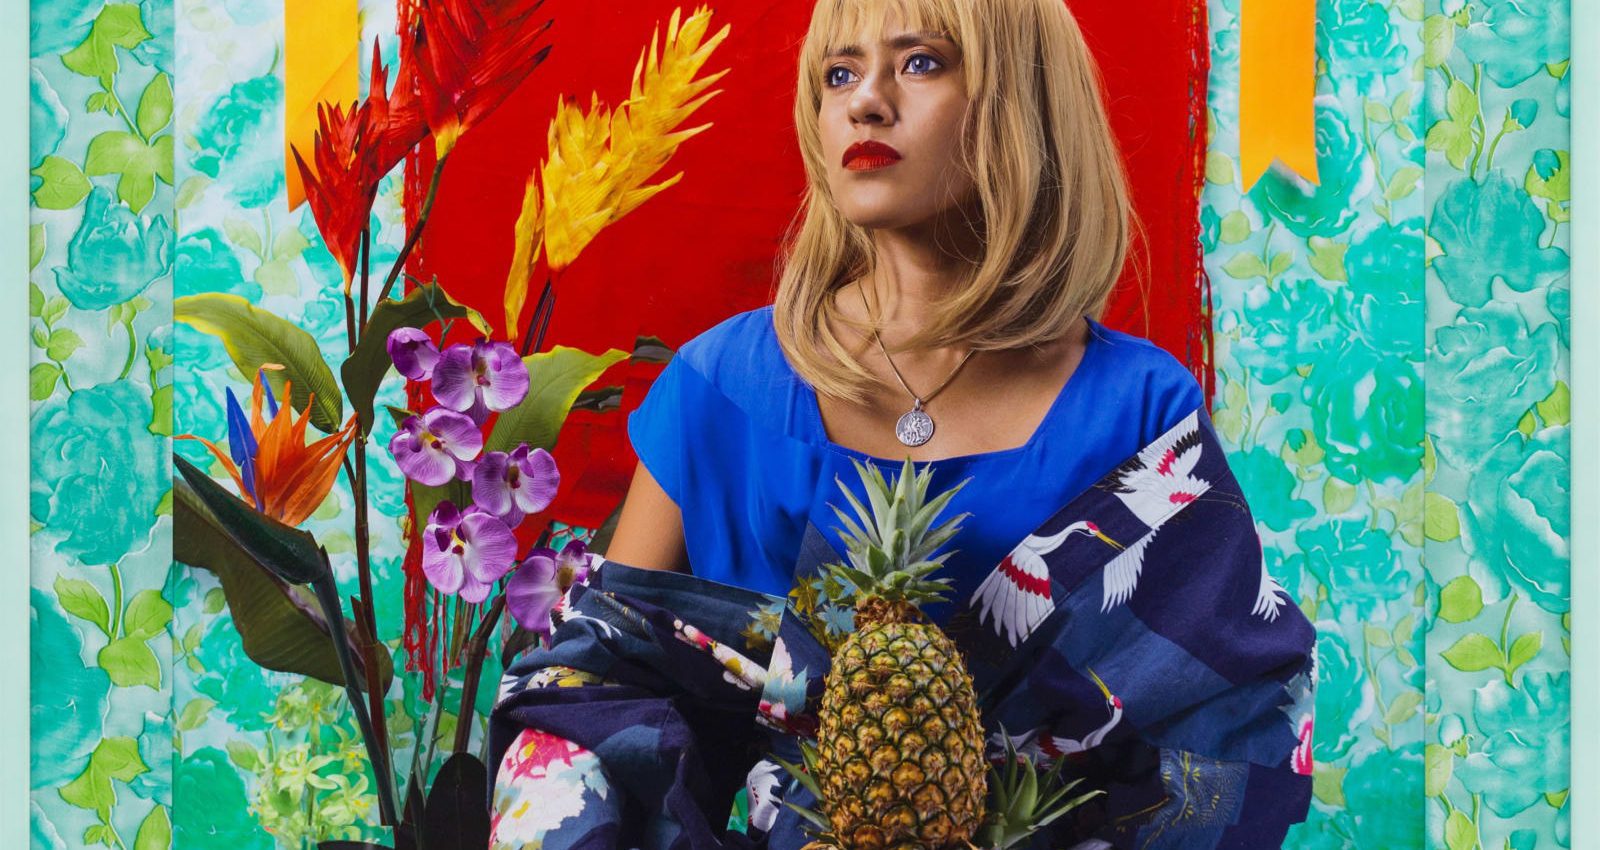 wawi navarroza, remember who you are strange fruit _ the other asian self portrait with pineapple 2019-photography 114-x-86-cm